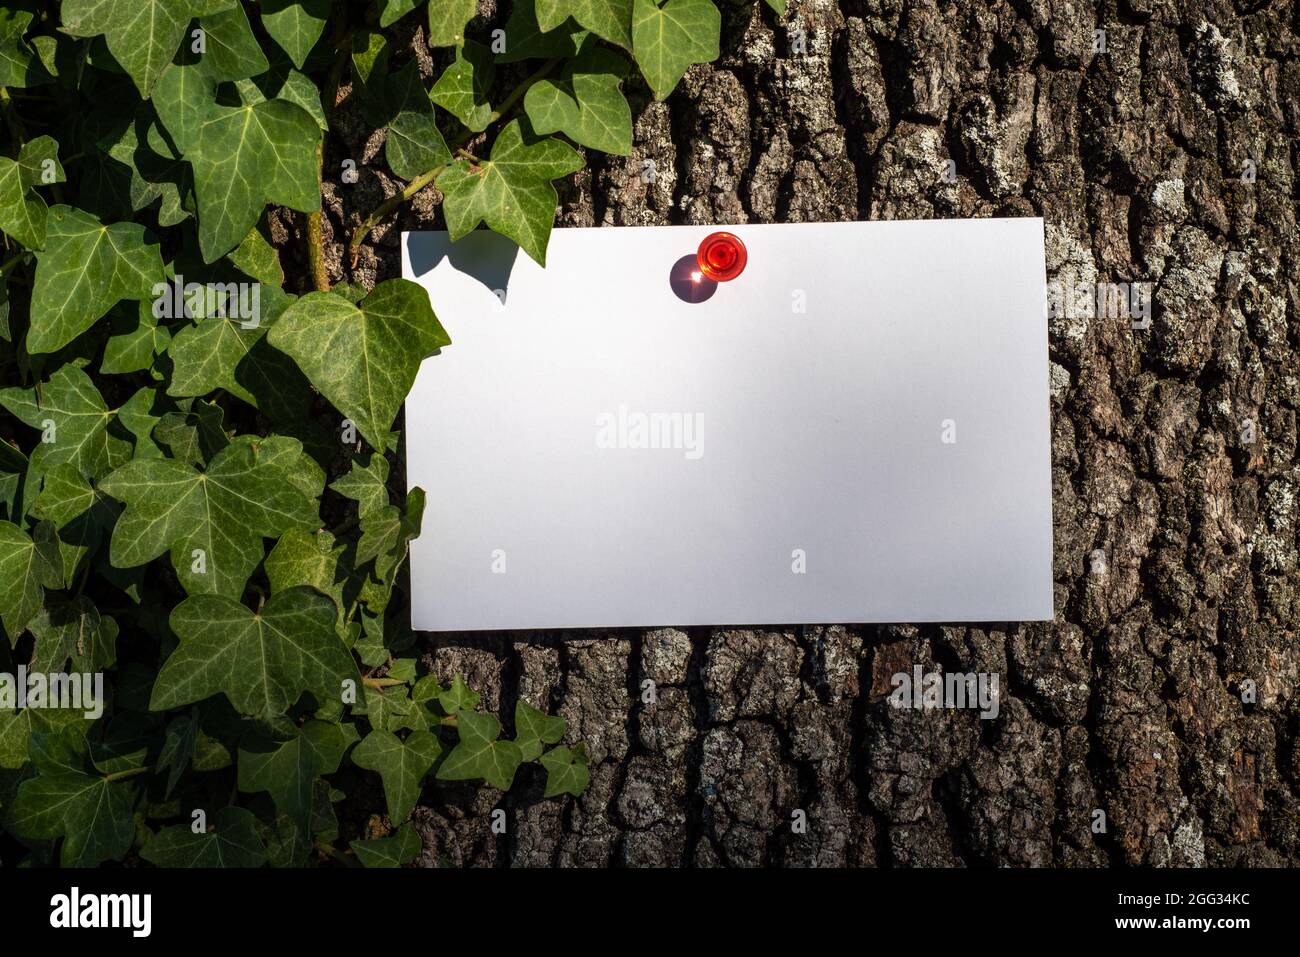 Blank greeting card, business card, invitation card mockup hanging with red drawing pin on tree. Bark in the background and trampling ivy in the natur Stock Photo